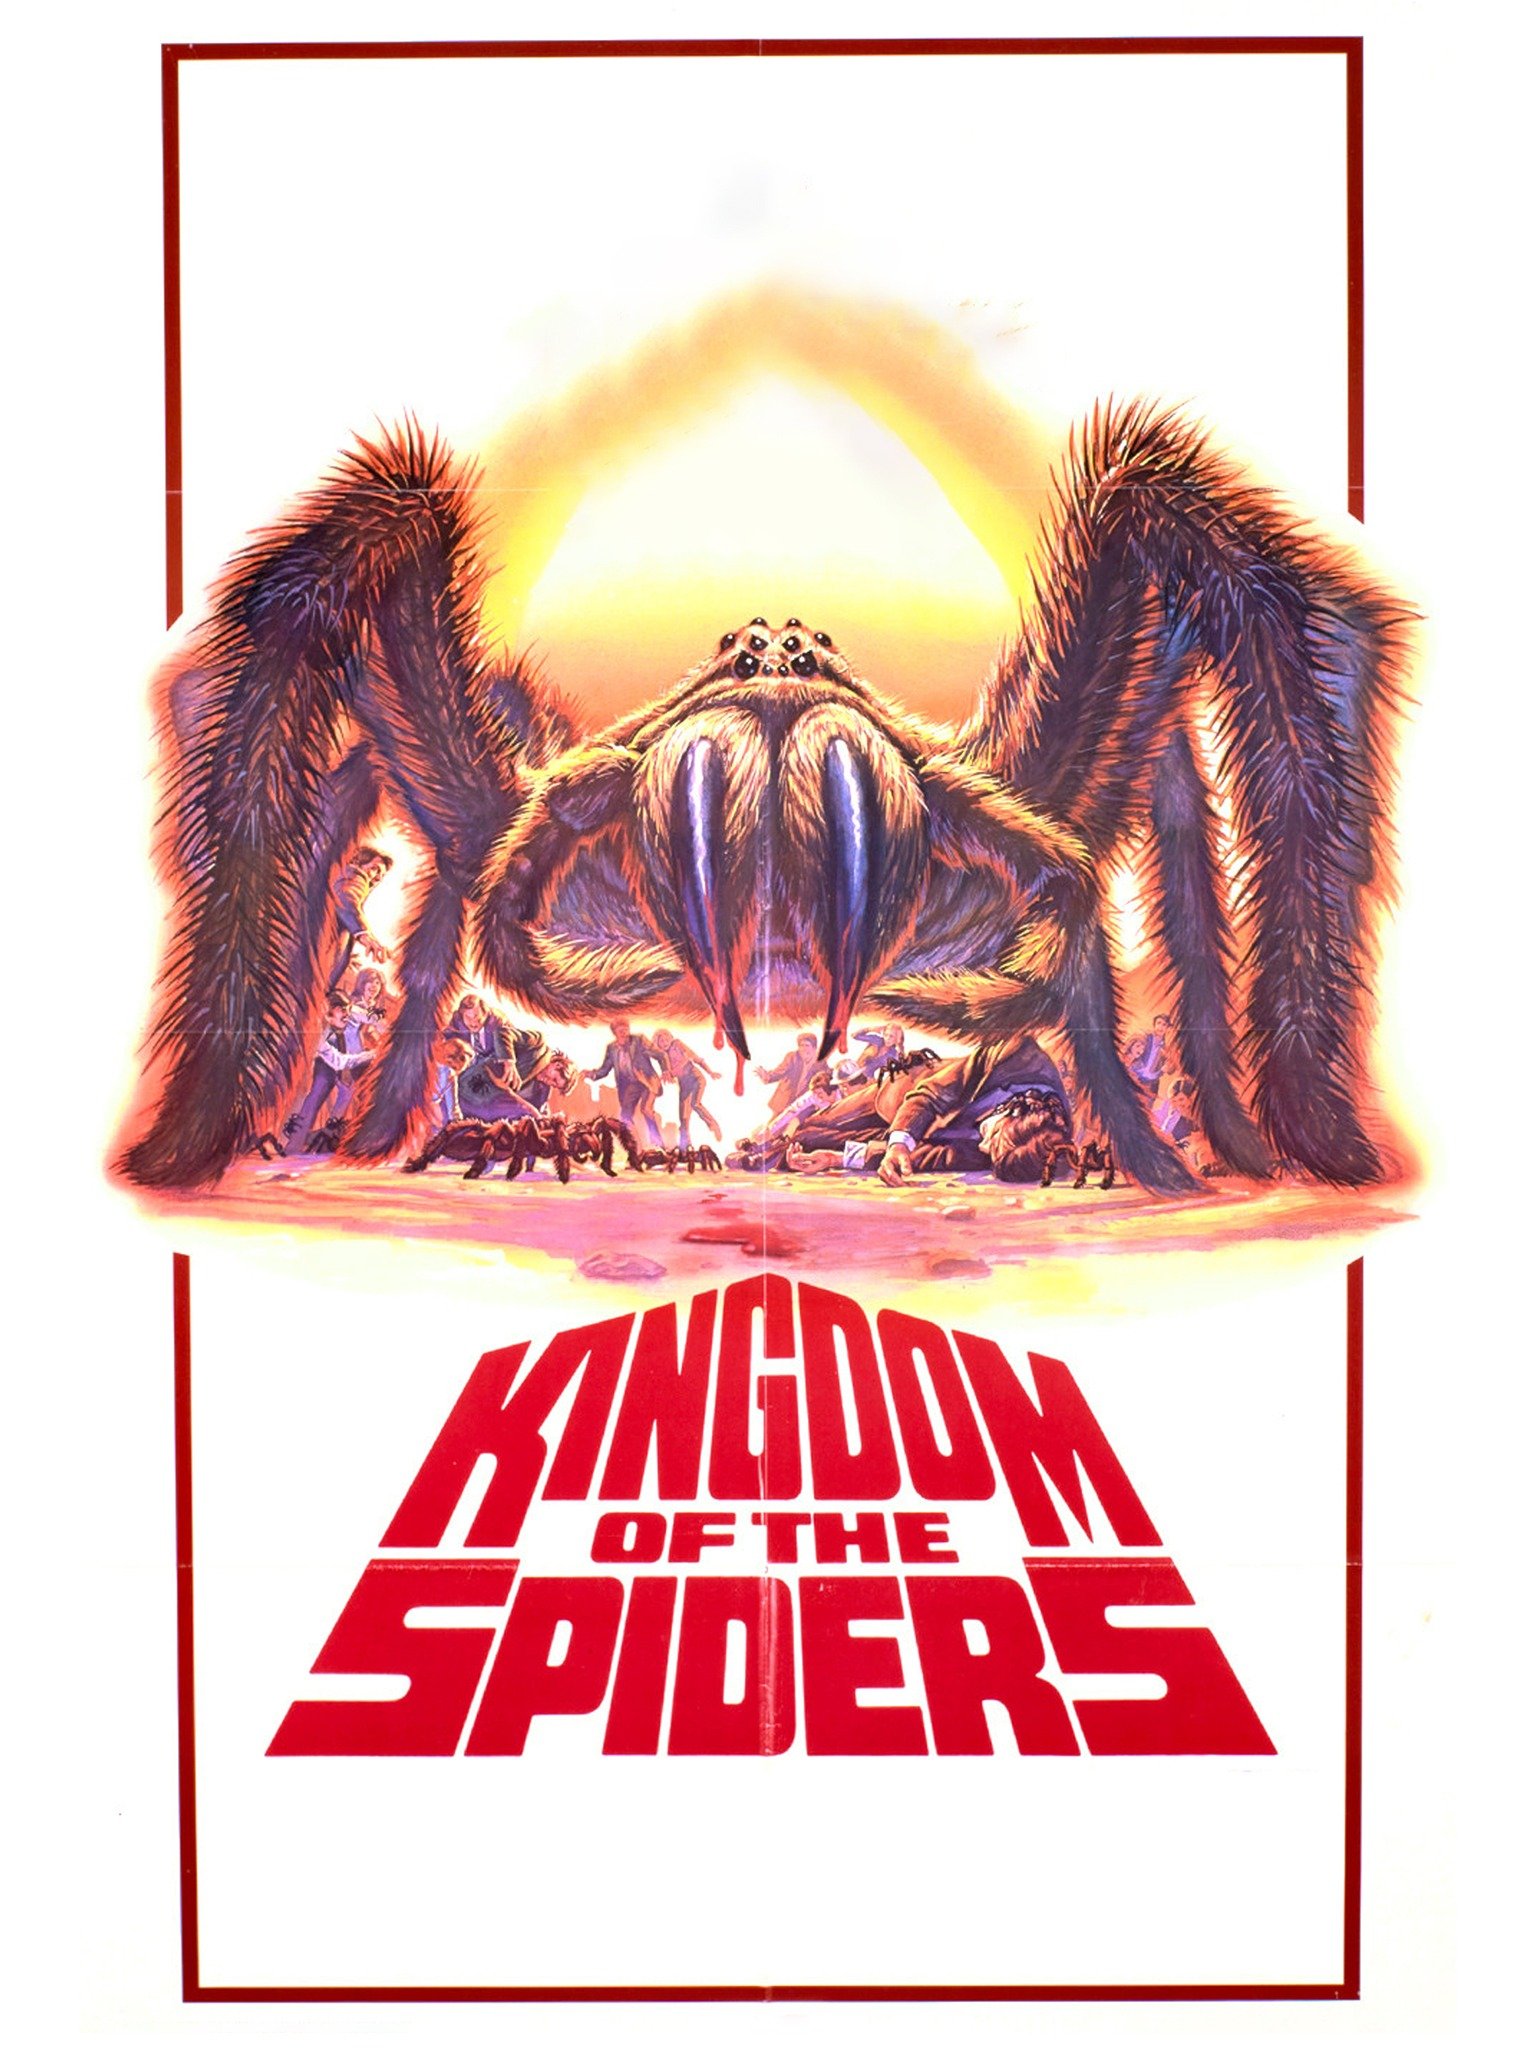 KINGDOM OF THE SPIDERS 01 B-MOVIE REPRODUCTION ART PRINT A4 A3 A2 A1 